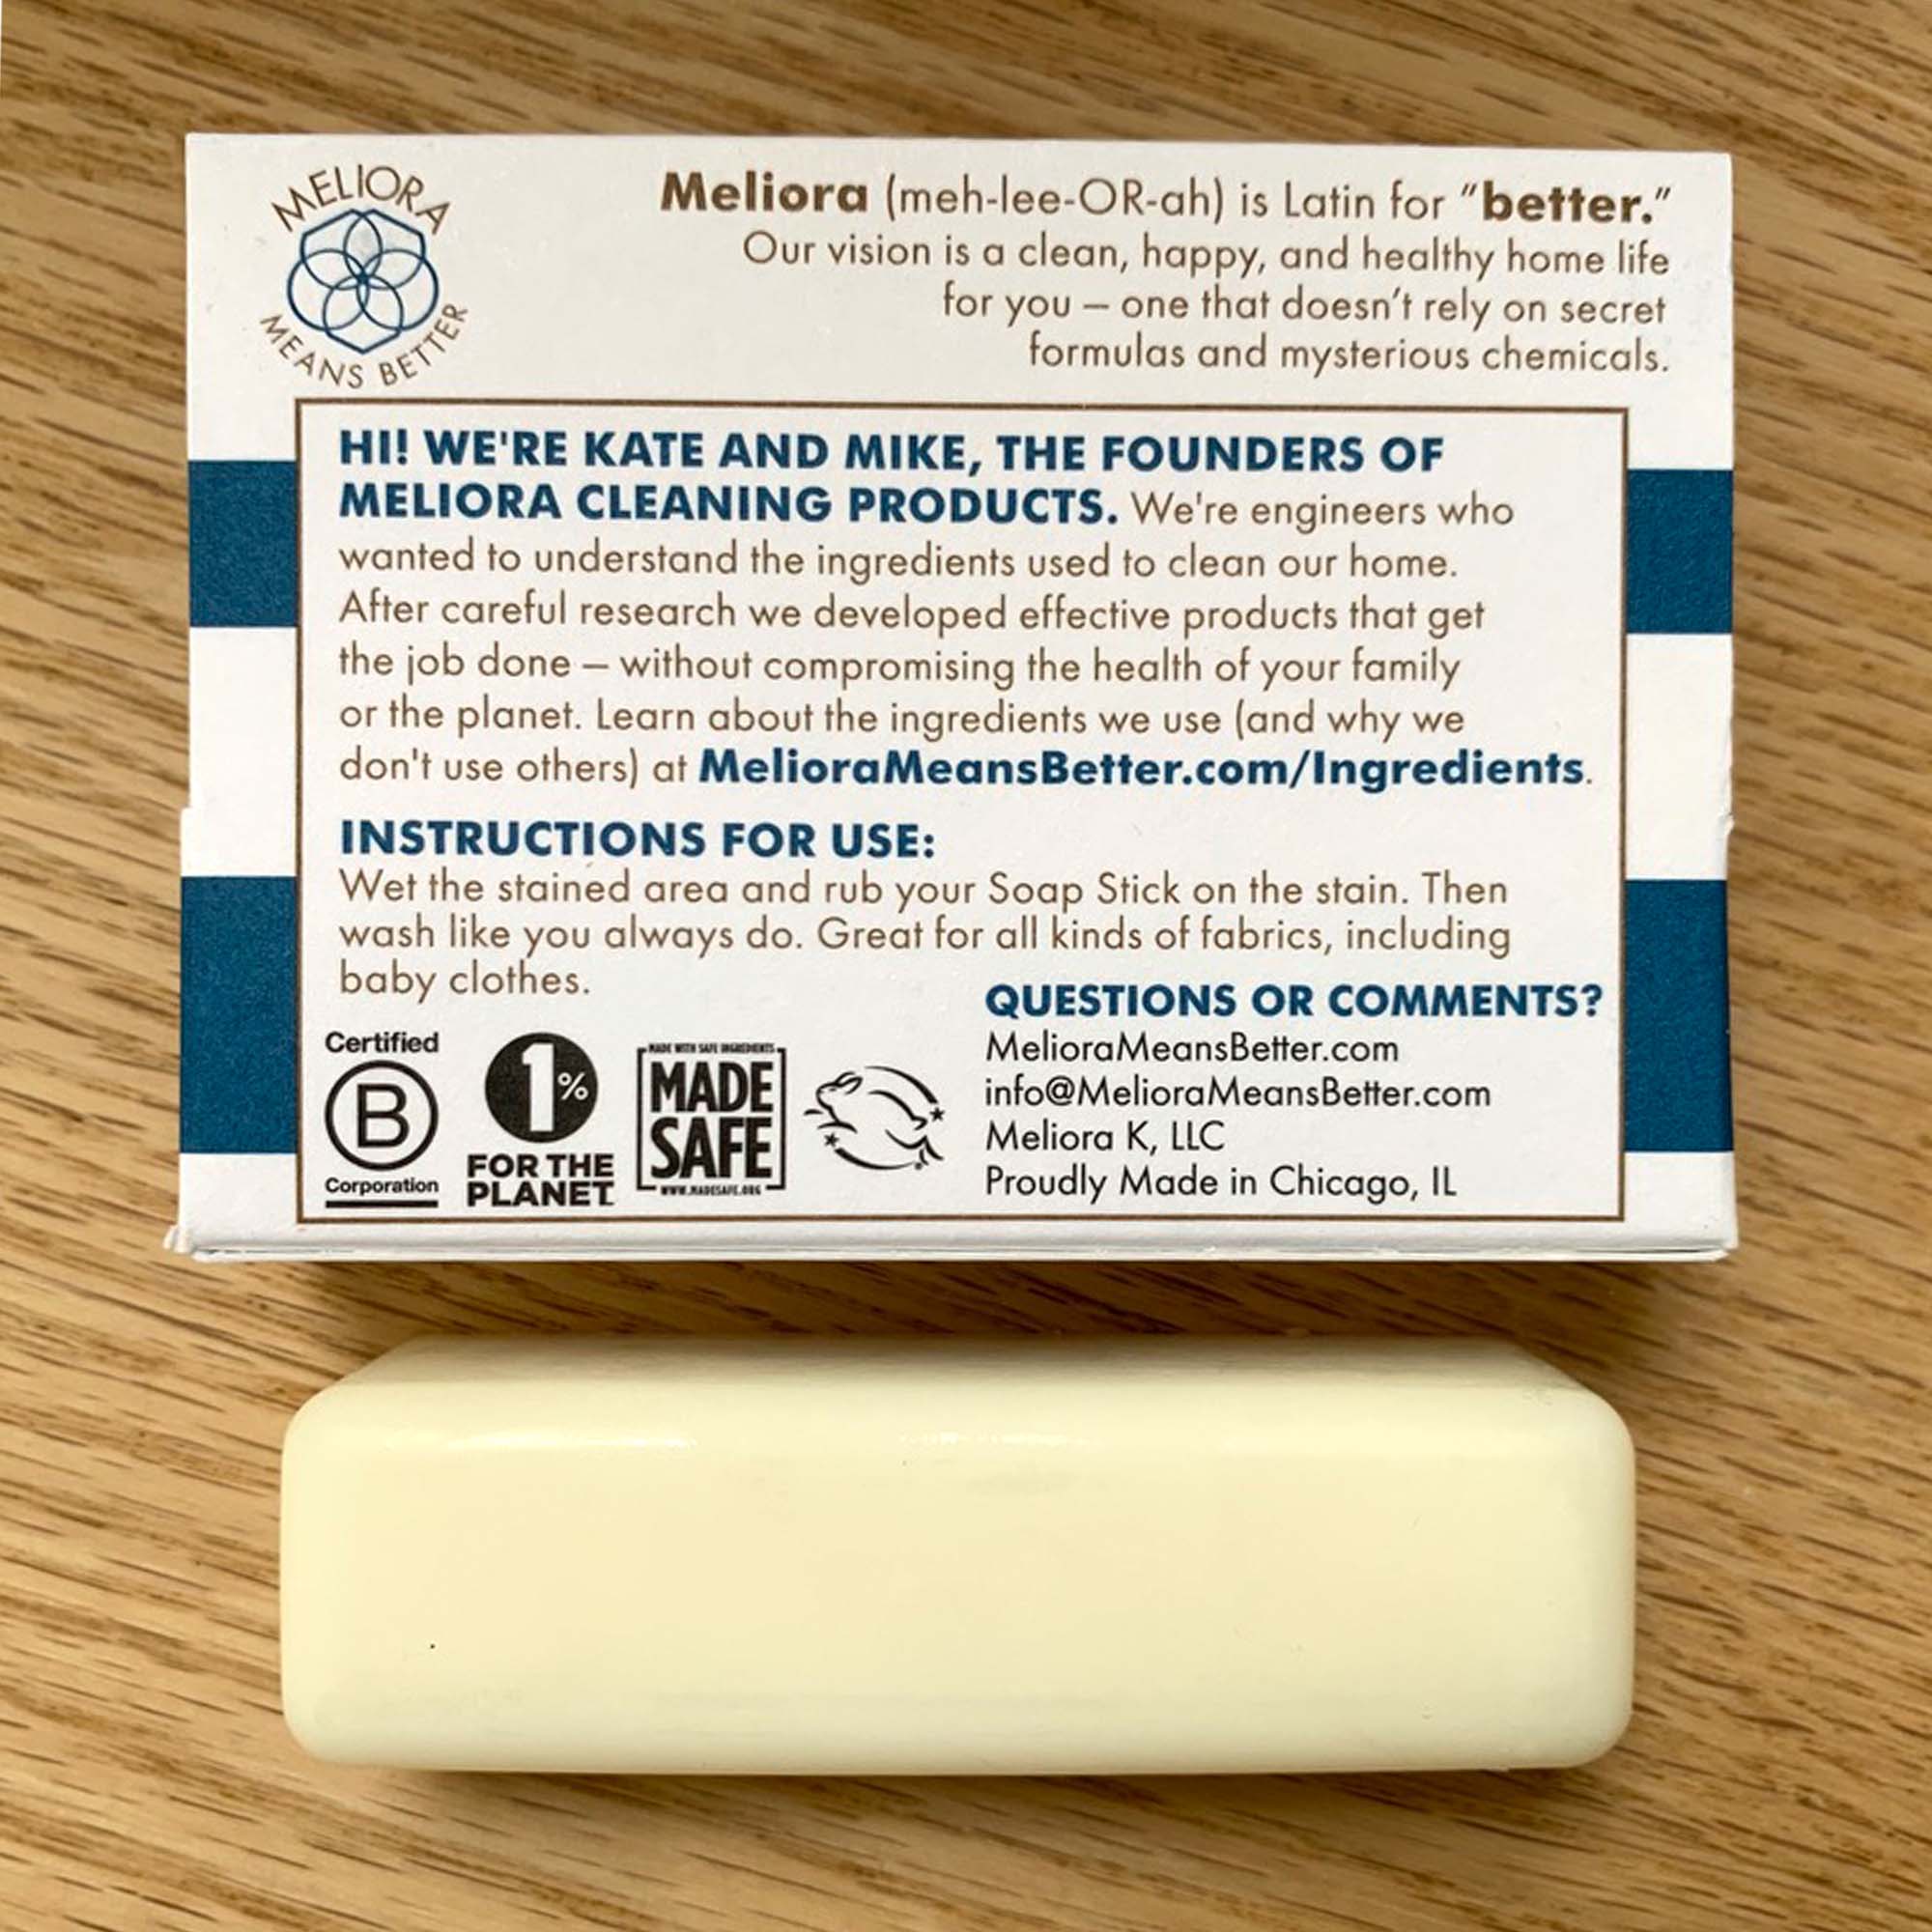 1.7 oz laundry stain removal soap stick package with instructions list, blue and white, with natural colored stick on wood tabletop